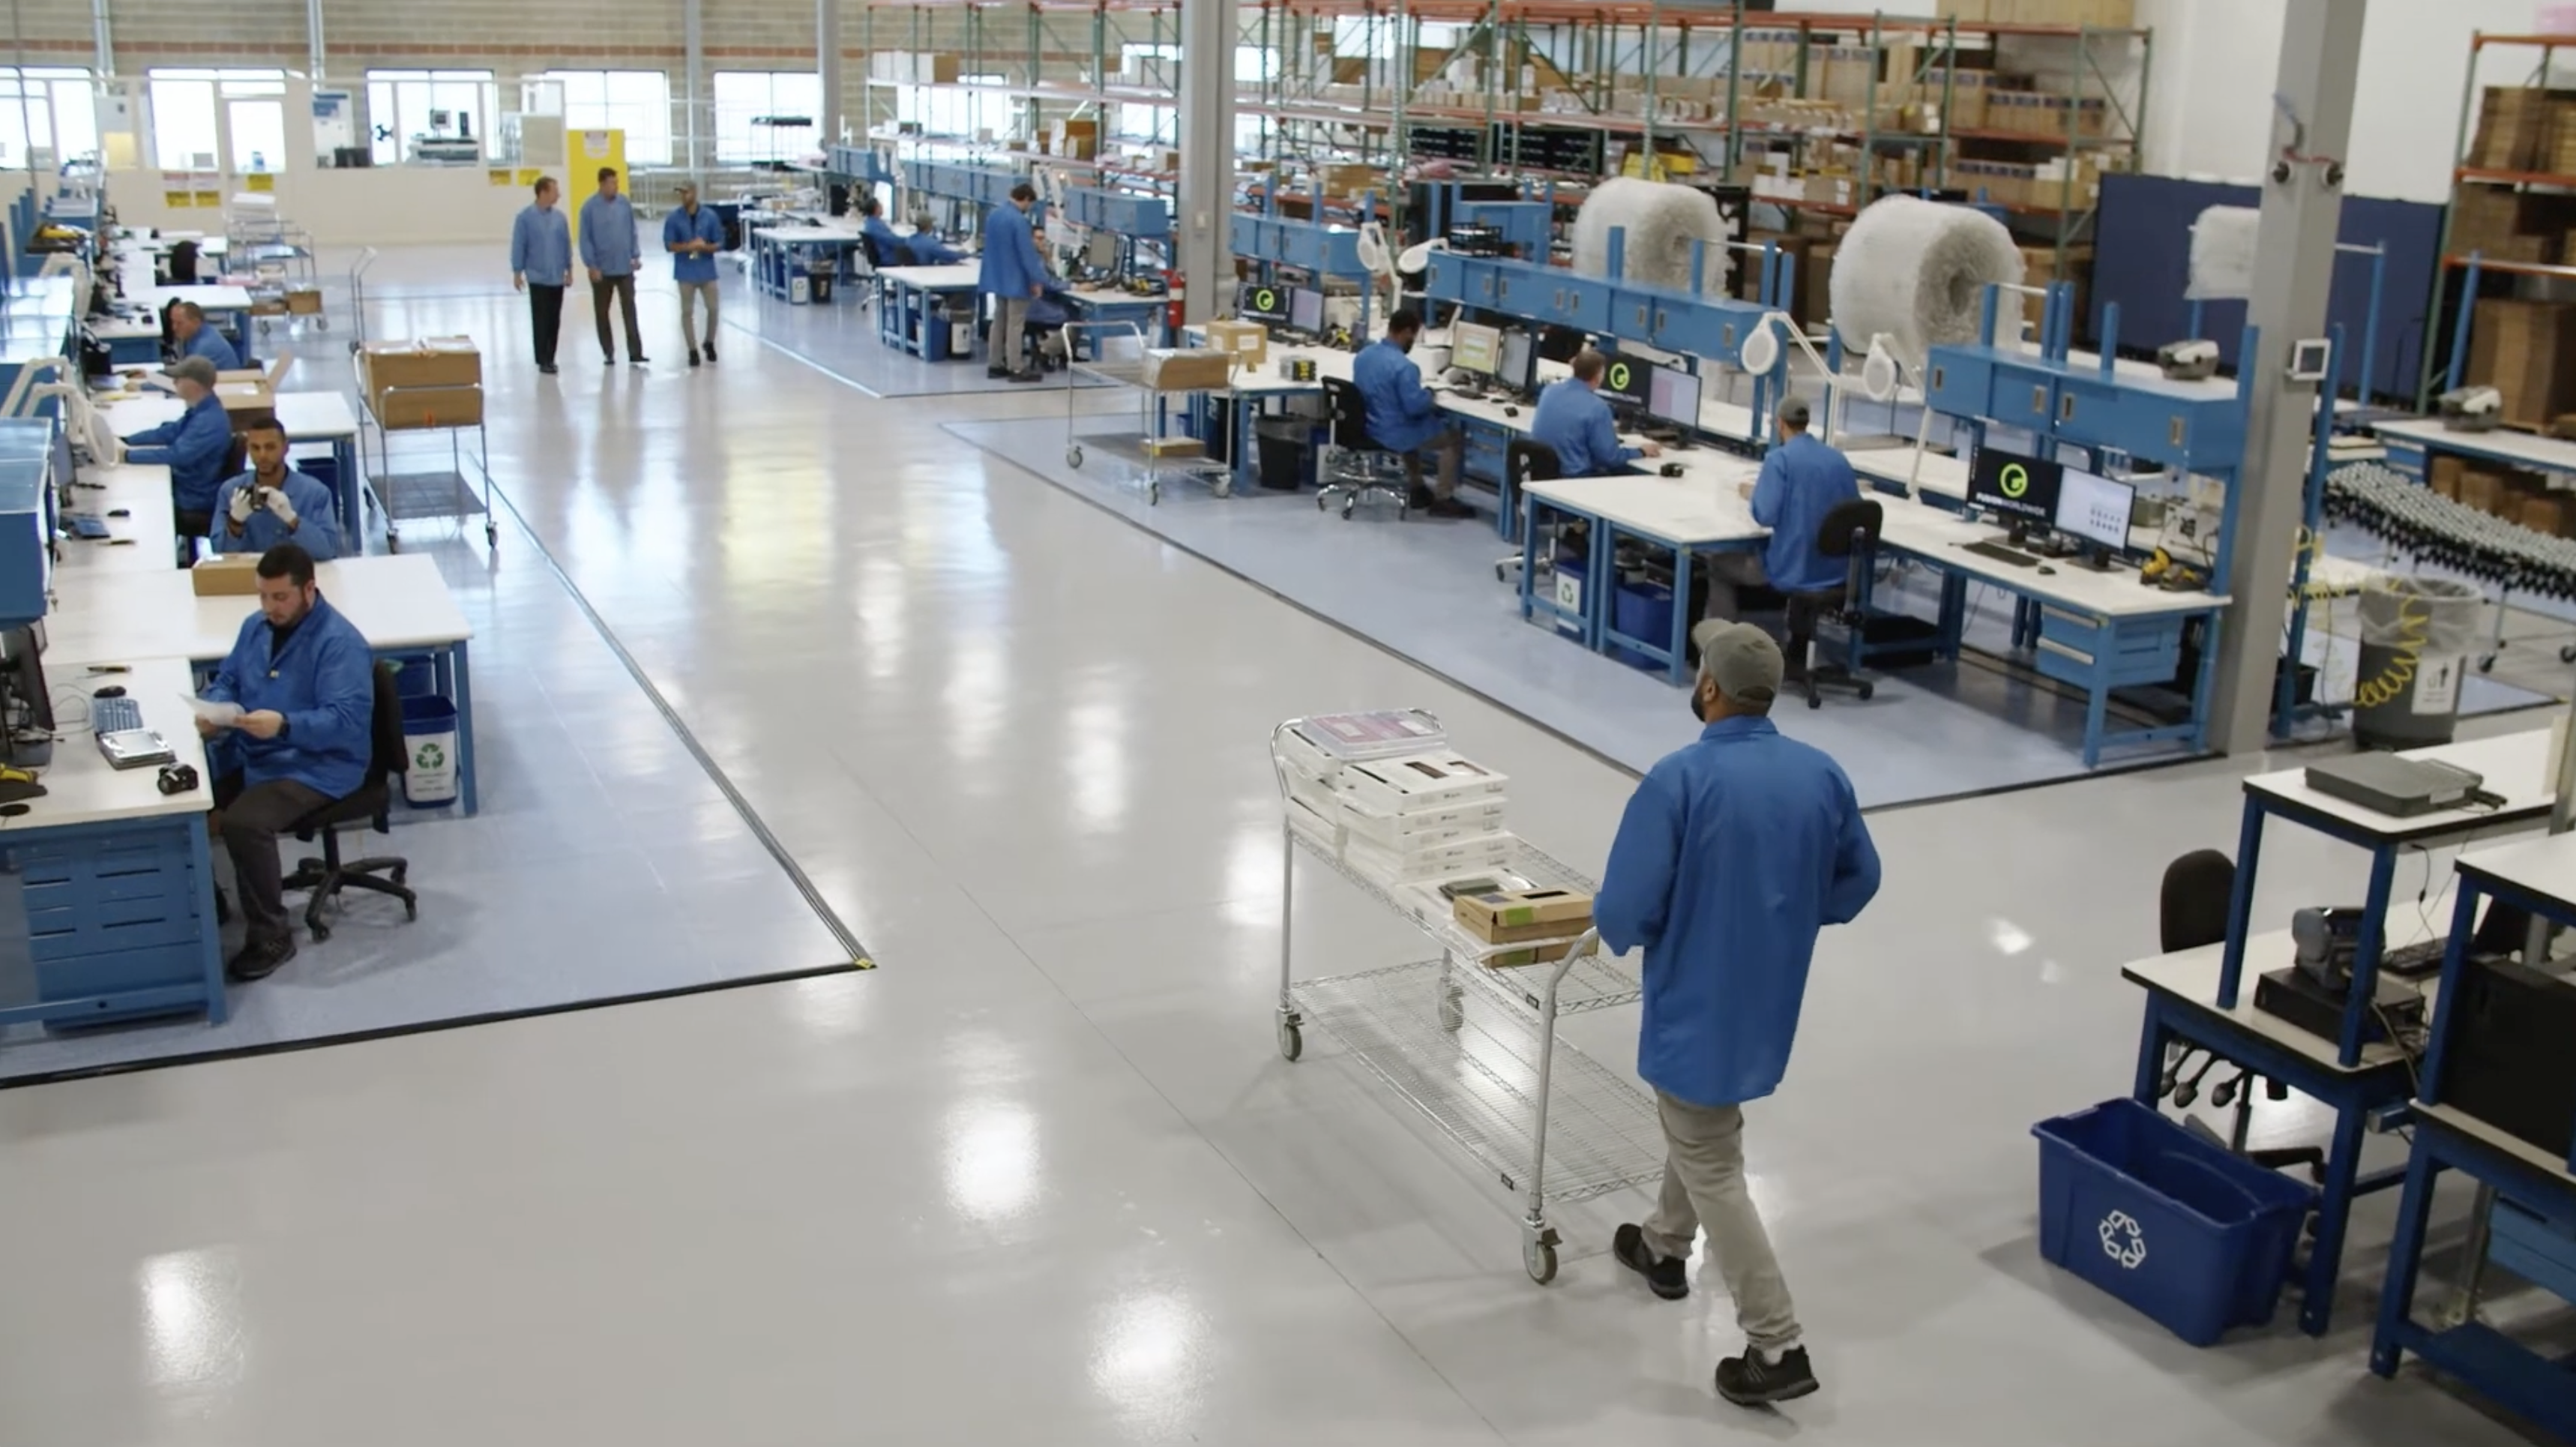 Fusion Worldwide's quality inspection team in a warehouse surrounded by desks and equipment